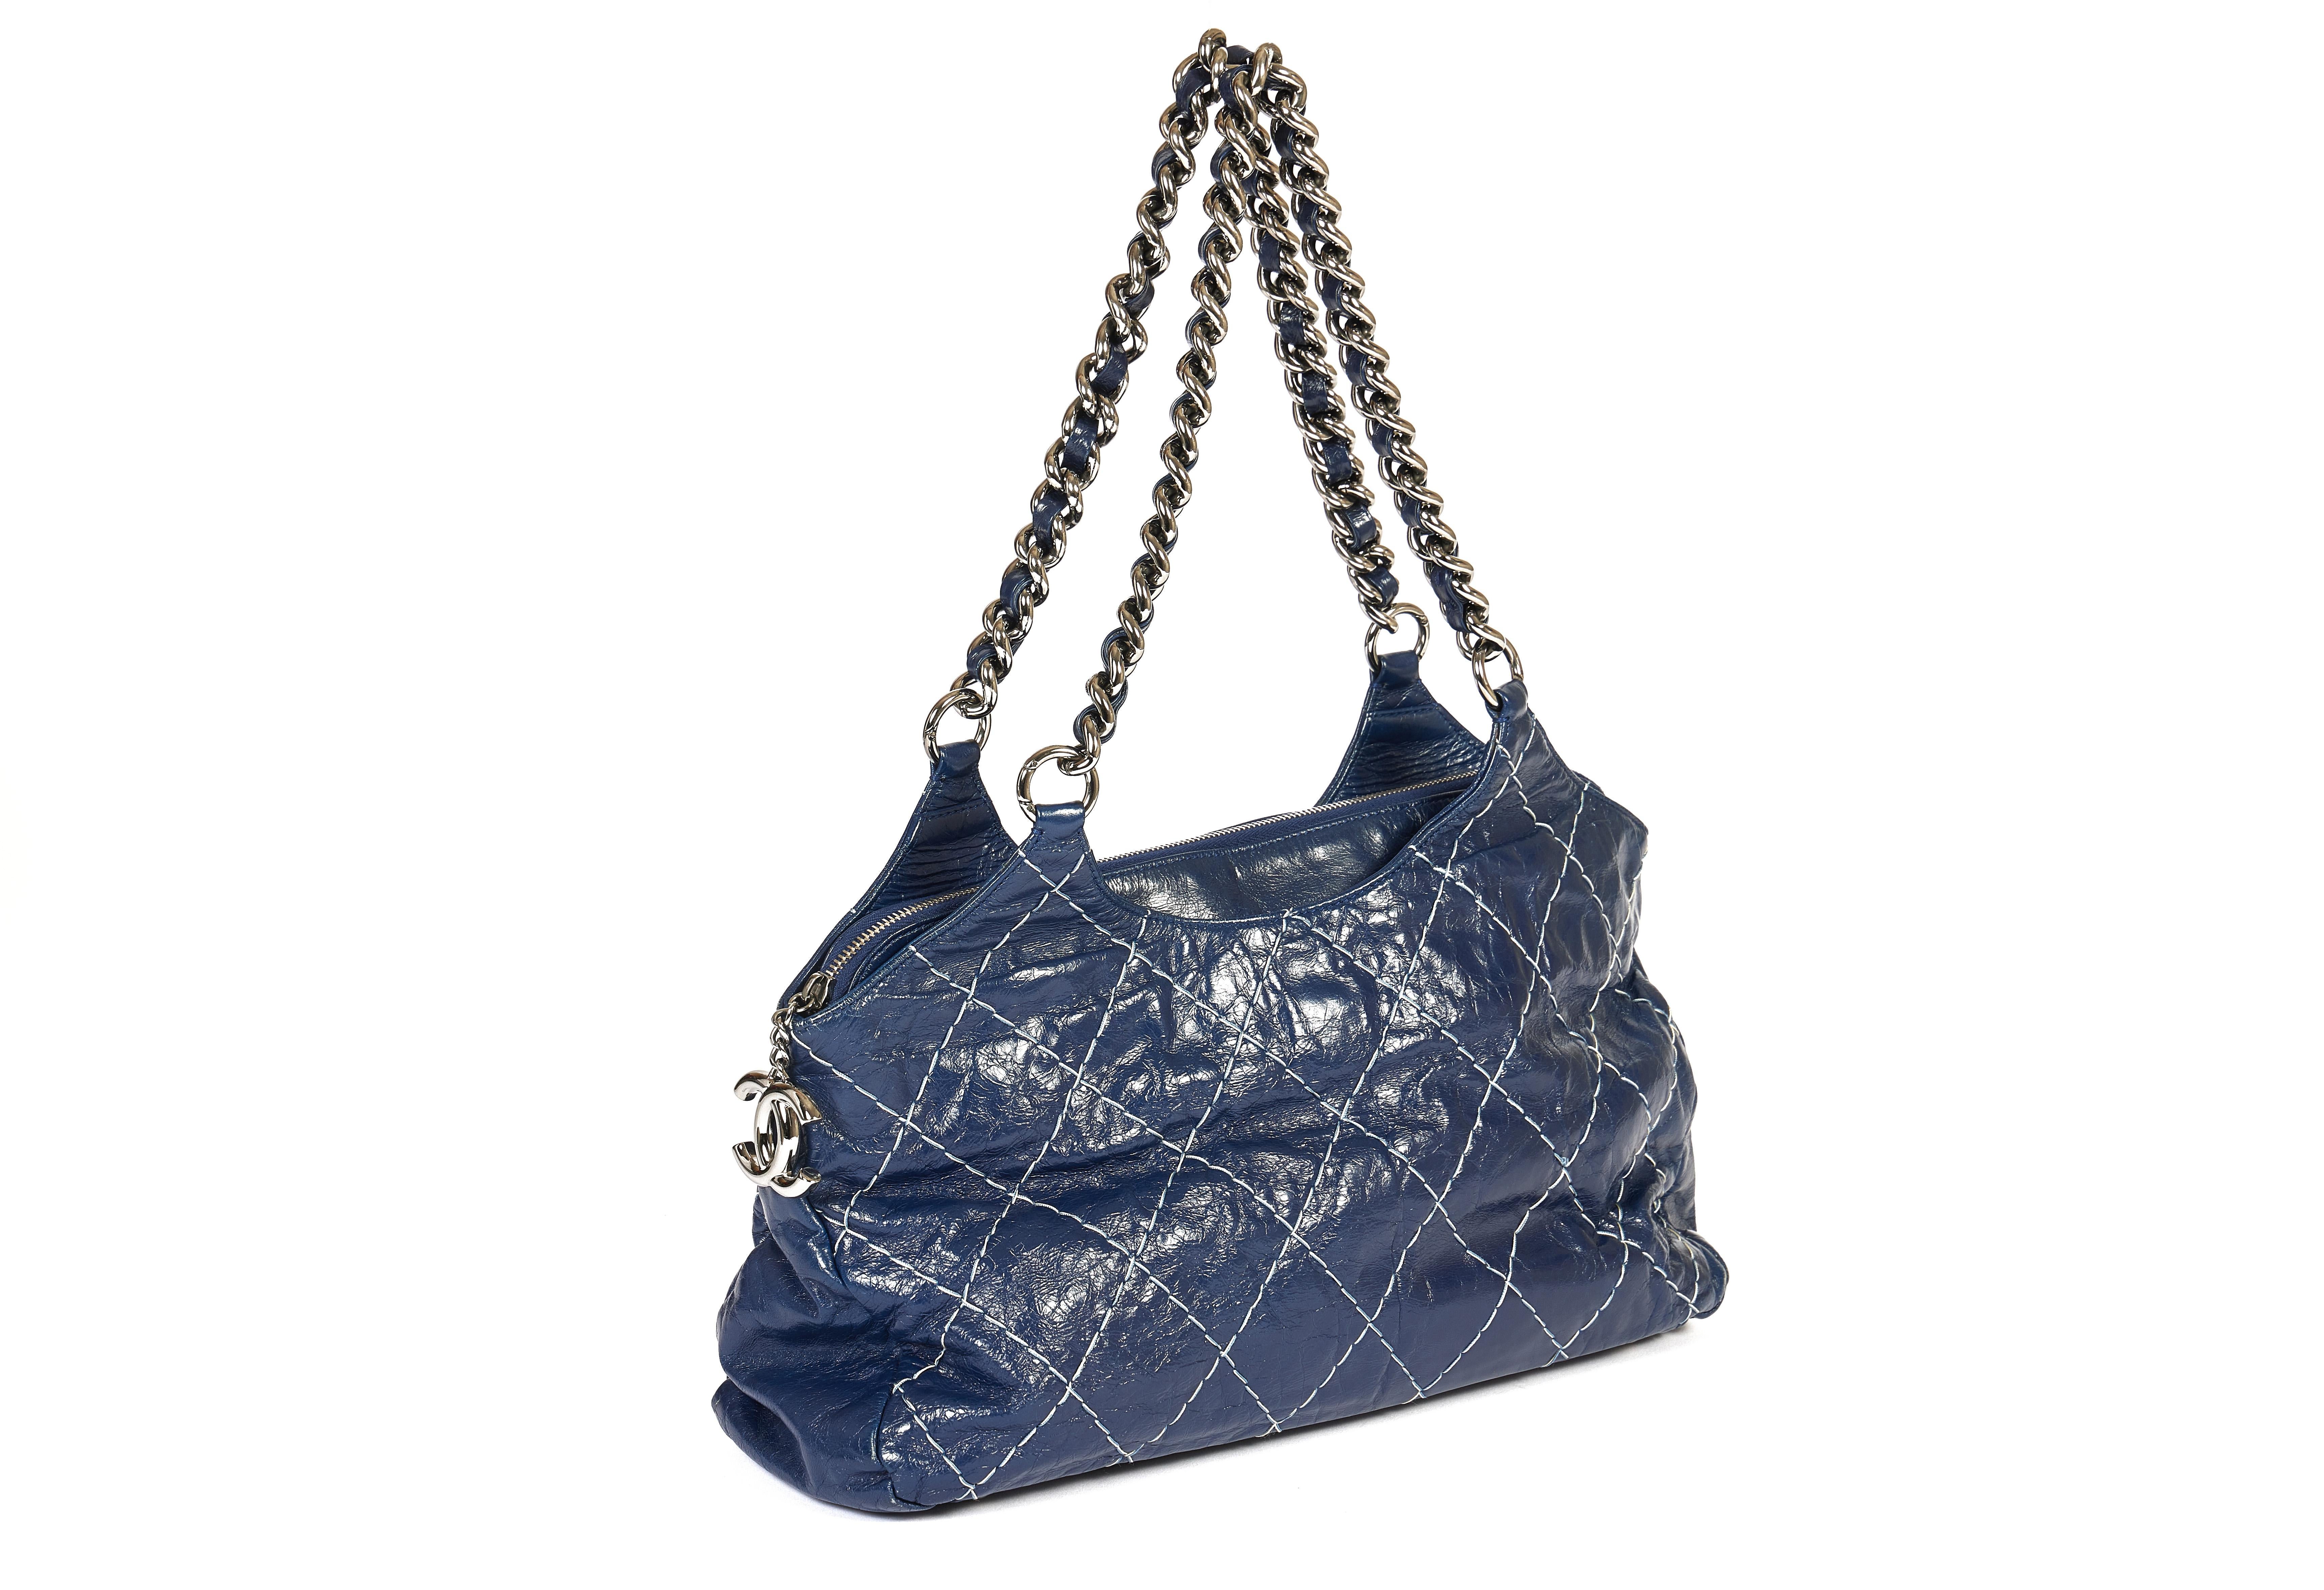 This shoulder bag from Chanel comes in a beautiful dark blue tone. The distressed glazed leather is stitched with a quilted pattern. The two silver shoulder chains match perfectly with the double CC logo from the zipper. The shoulder drop is 11